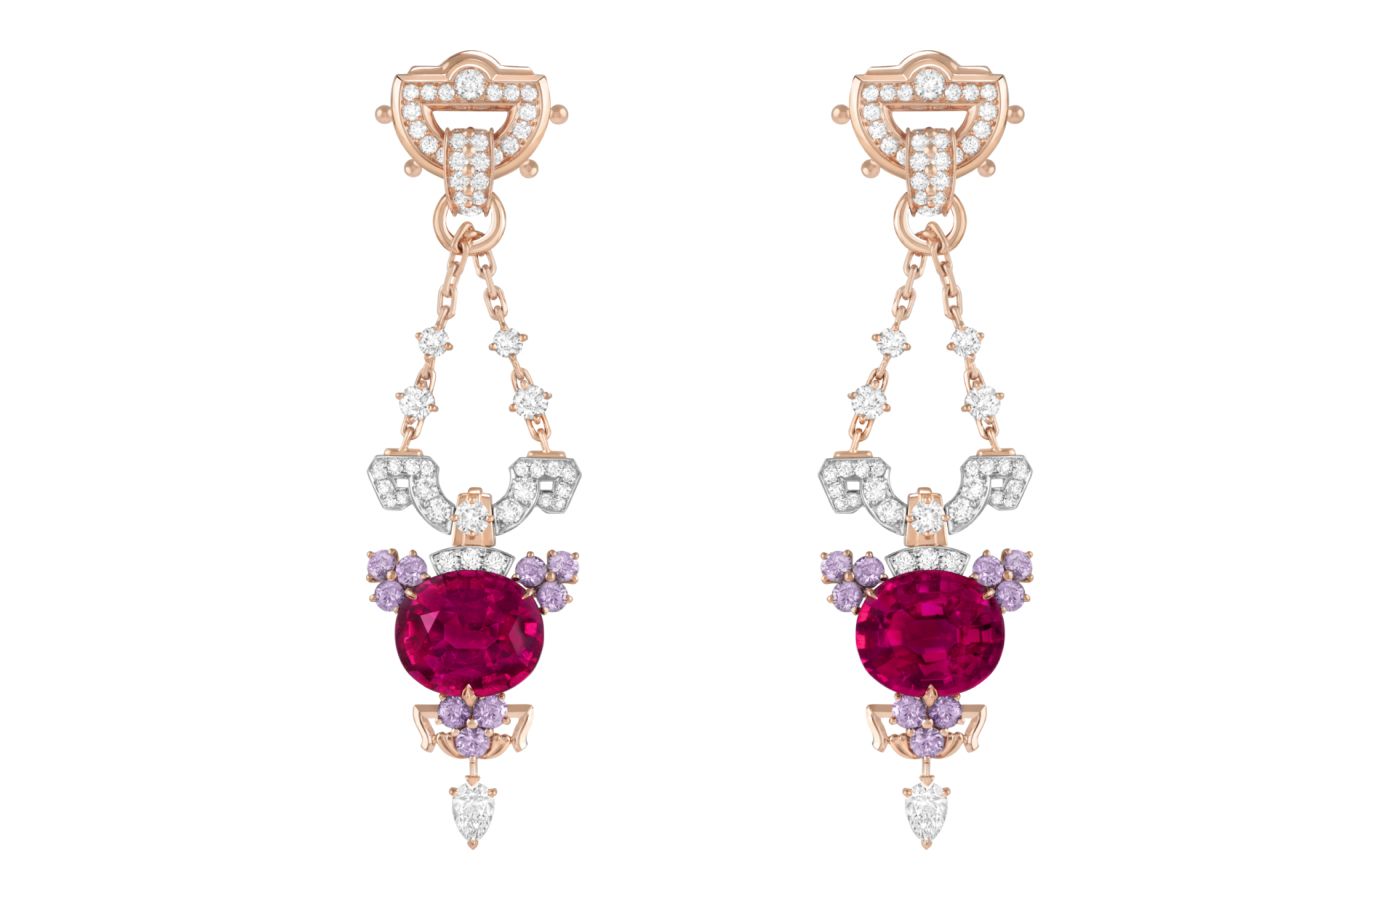 Van Cleef & Arpels Lucendi earrings in rose gold, white gold, two oval-cut rubellites weighing 11.48-cts and 10.14-cts, mauve sapphires and diamonds from Le Grand Tour High Jewellery collection